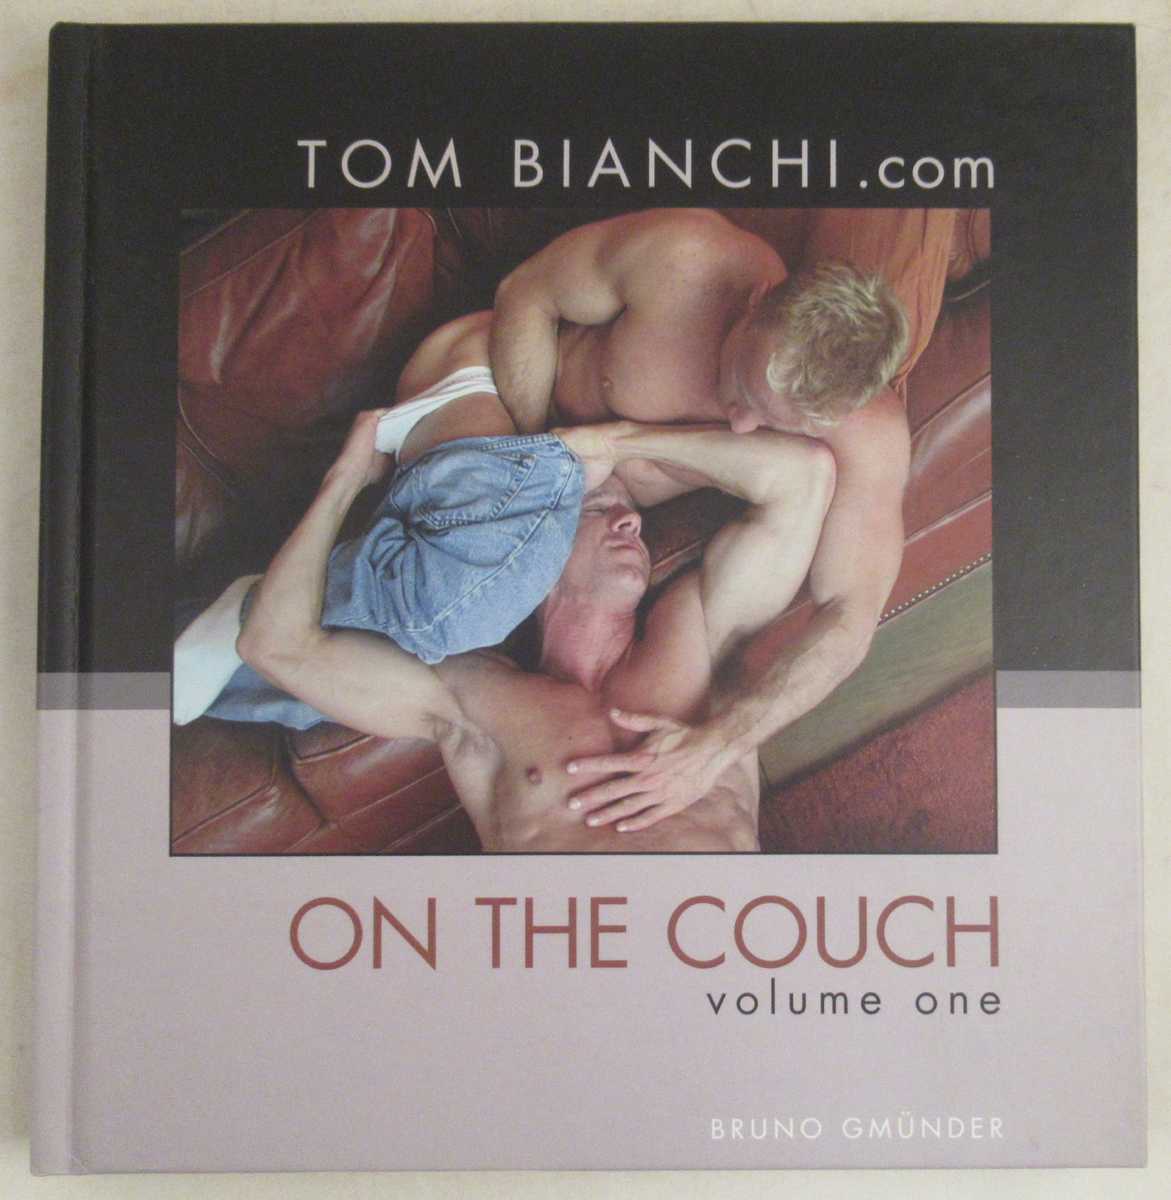 Bianchi, Tom - On the Couch, Volume One